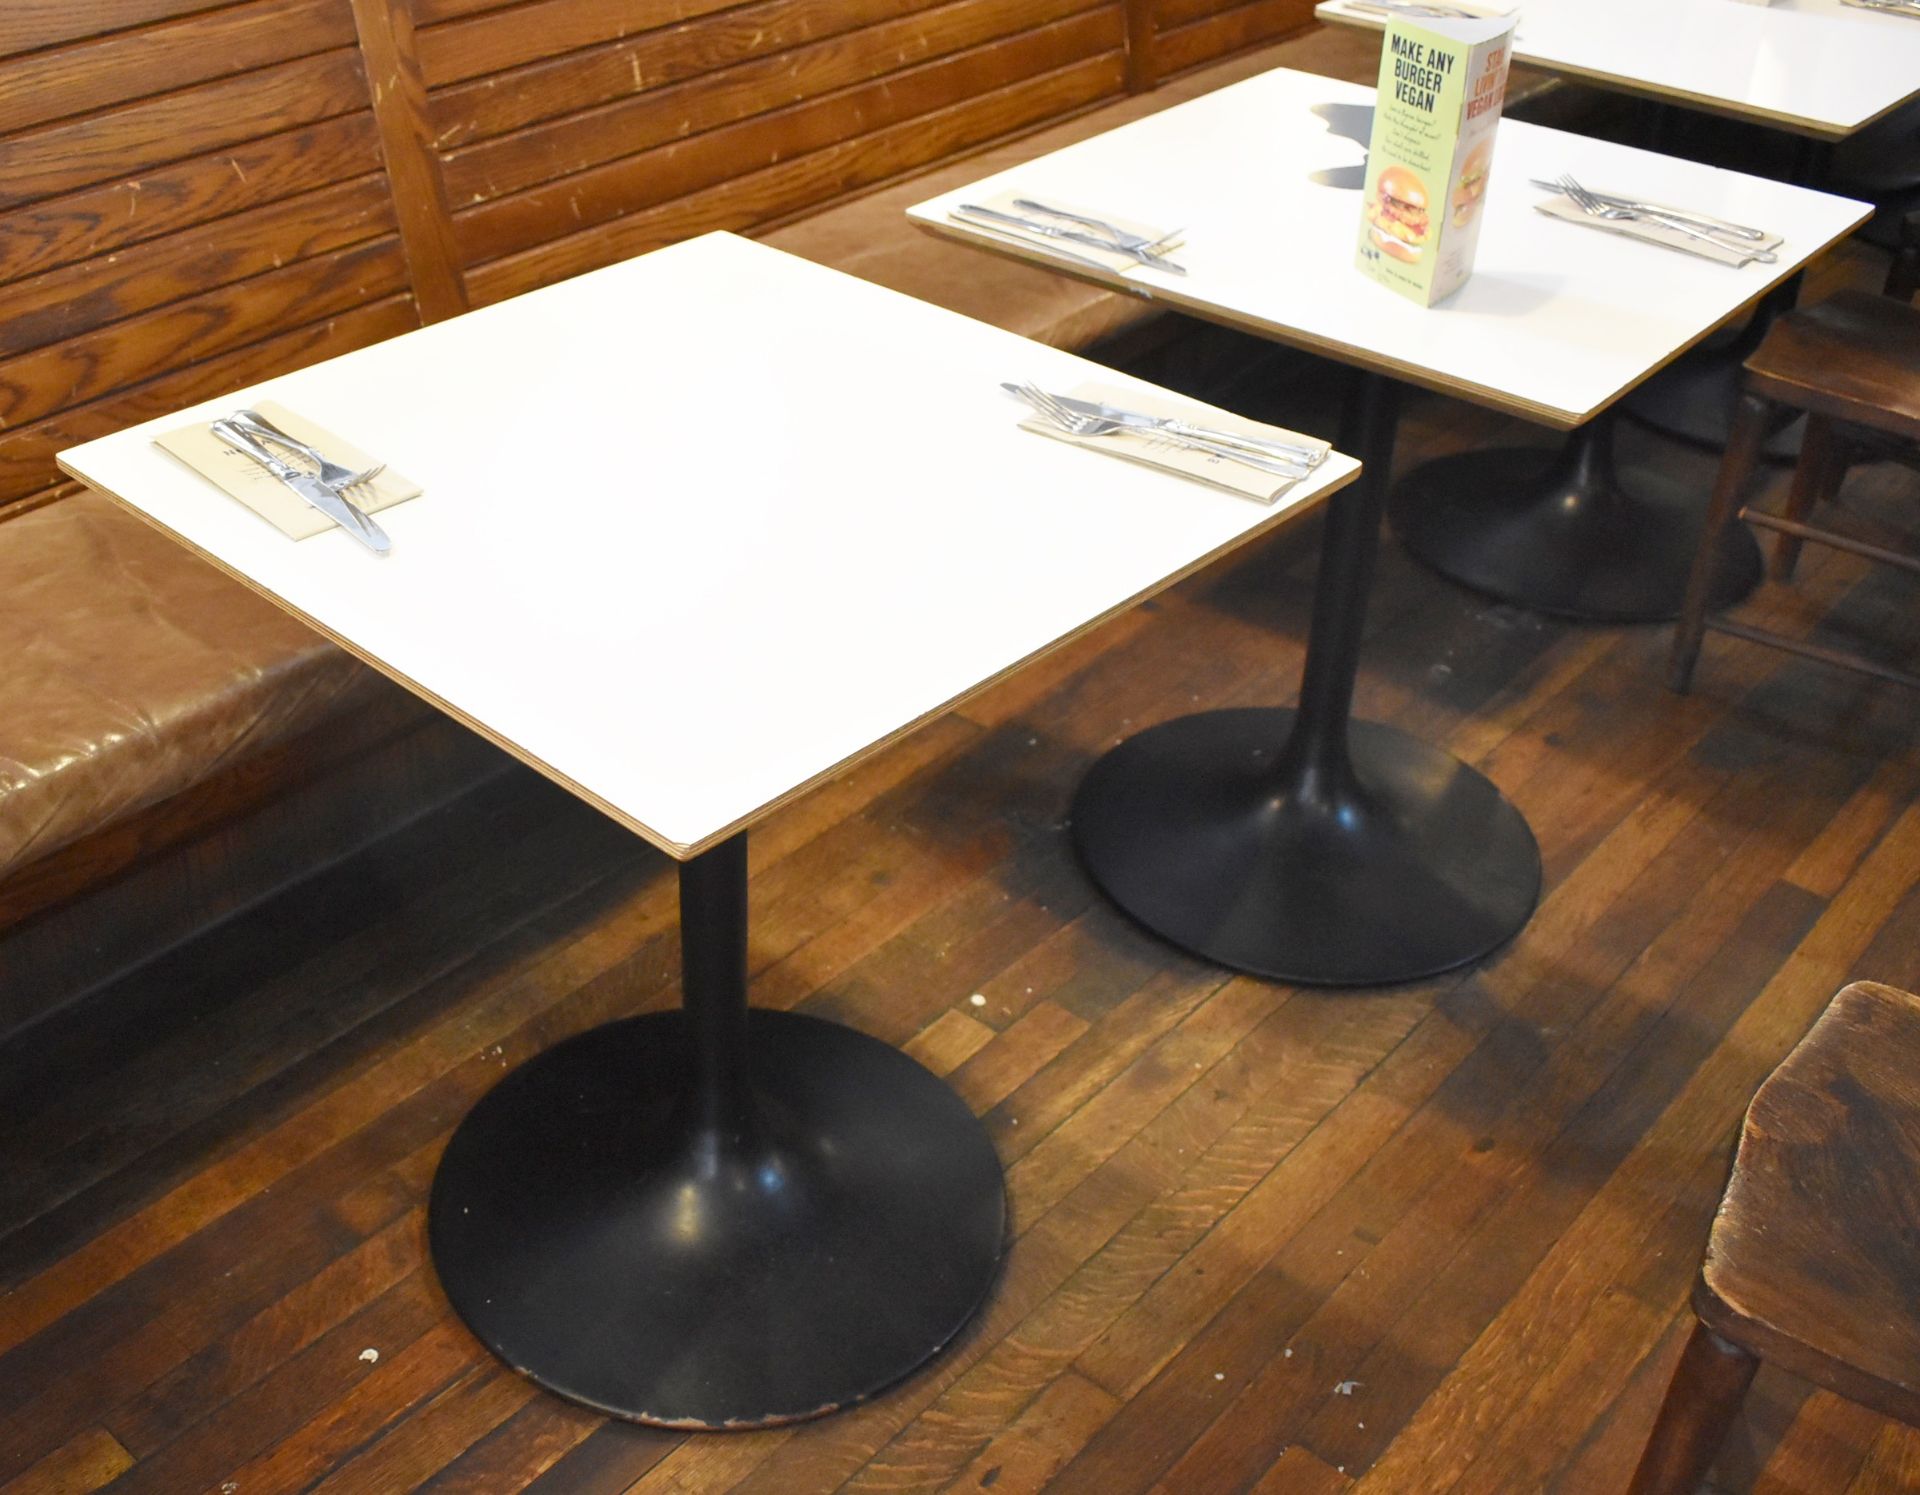 4 x Square Dining Tables With Black Tulip Bases and White Laminate Tops - Dimensions: H72 x W65 - Image 3 of 4